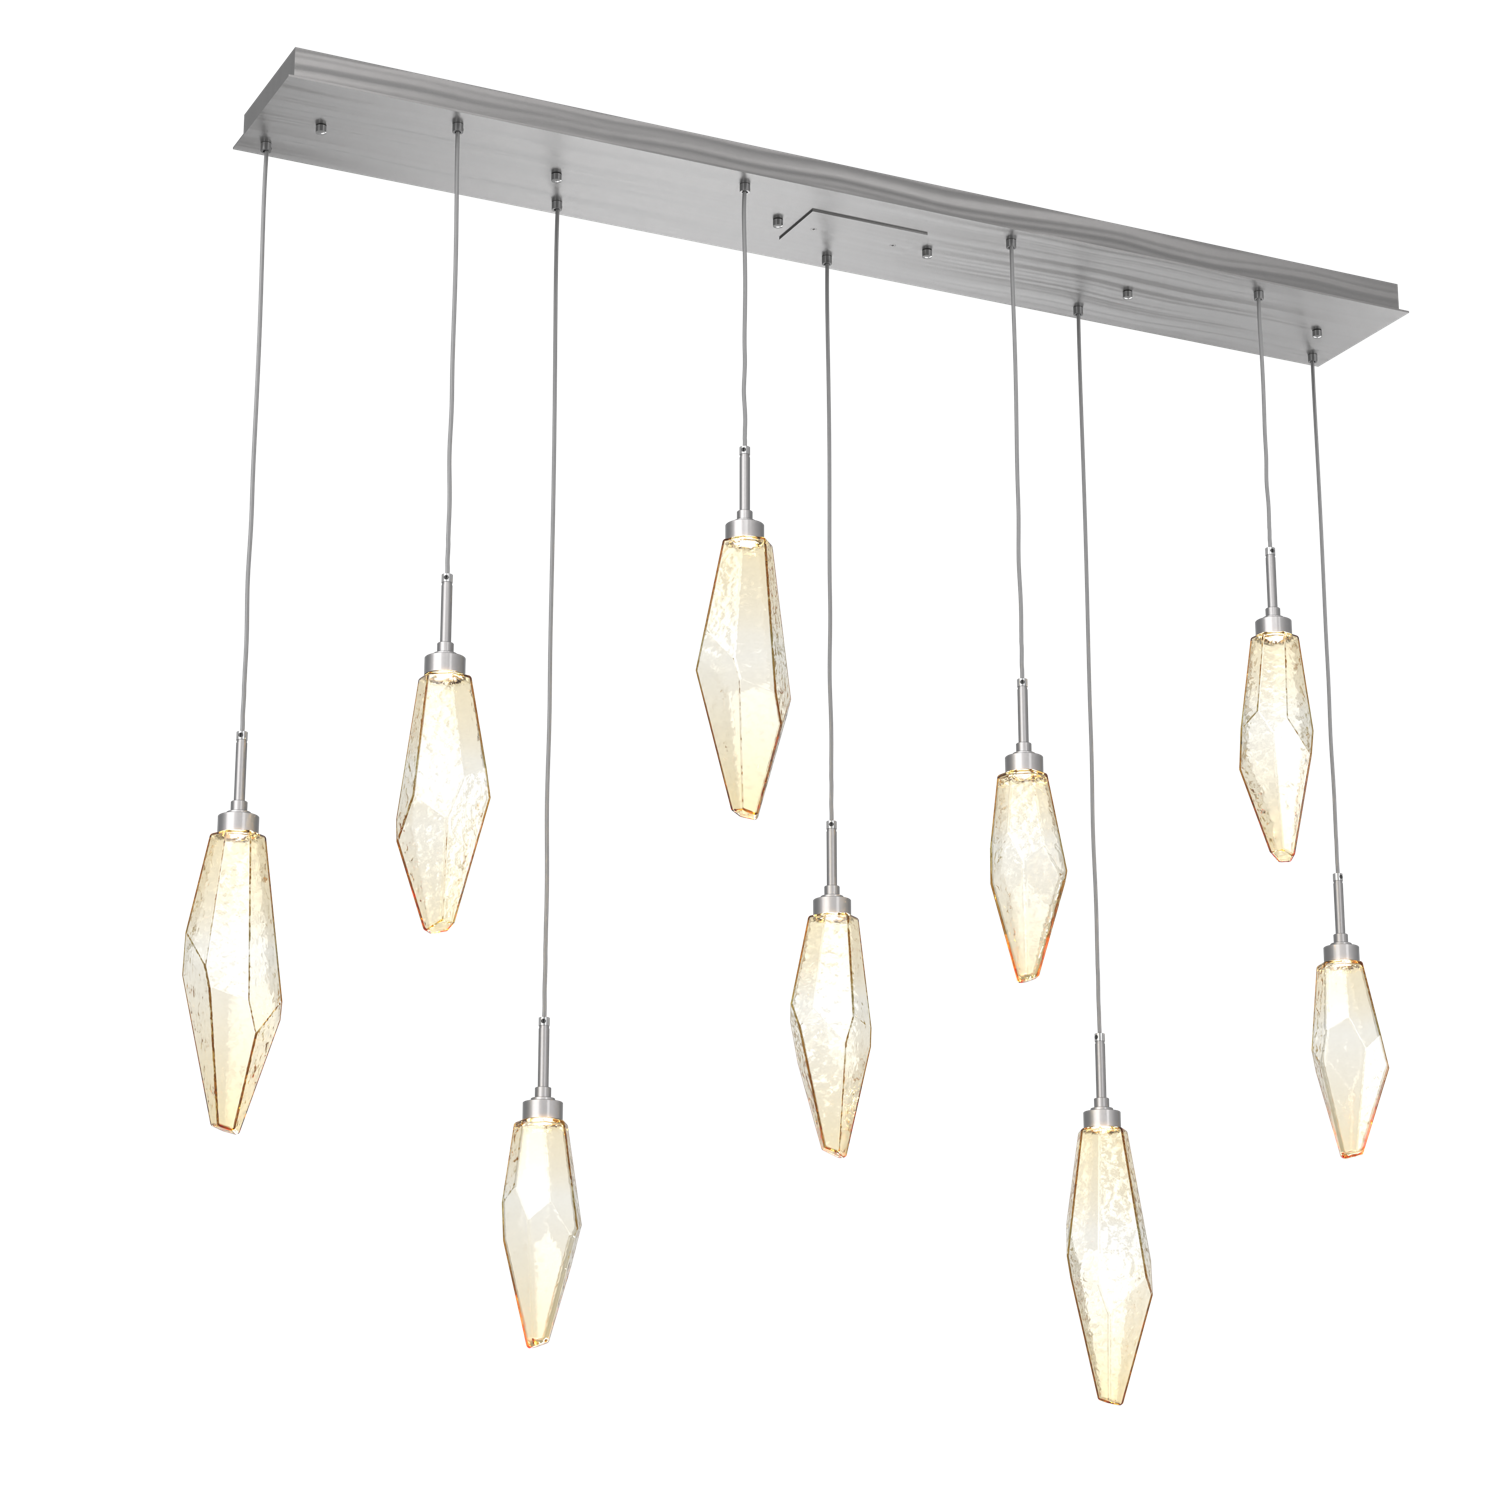 PLB0050-09-SN-CA-Hammerton-Studio-Rock-Crystal-9-light-linear-pendant-chandelier-with-satin-nickel-finish-and-chilled-amber-blown-glass-shades-and-LED-lamping